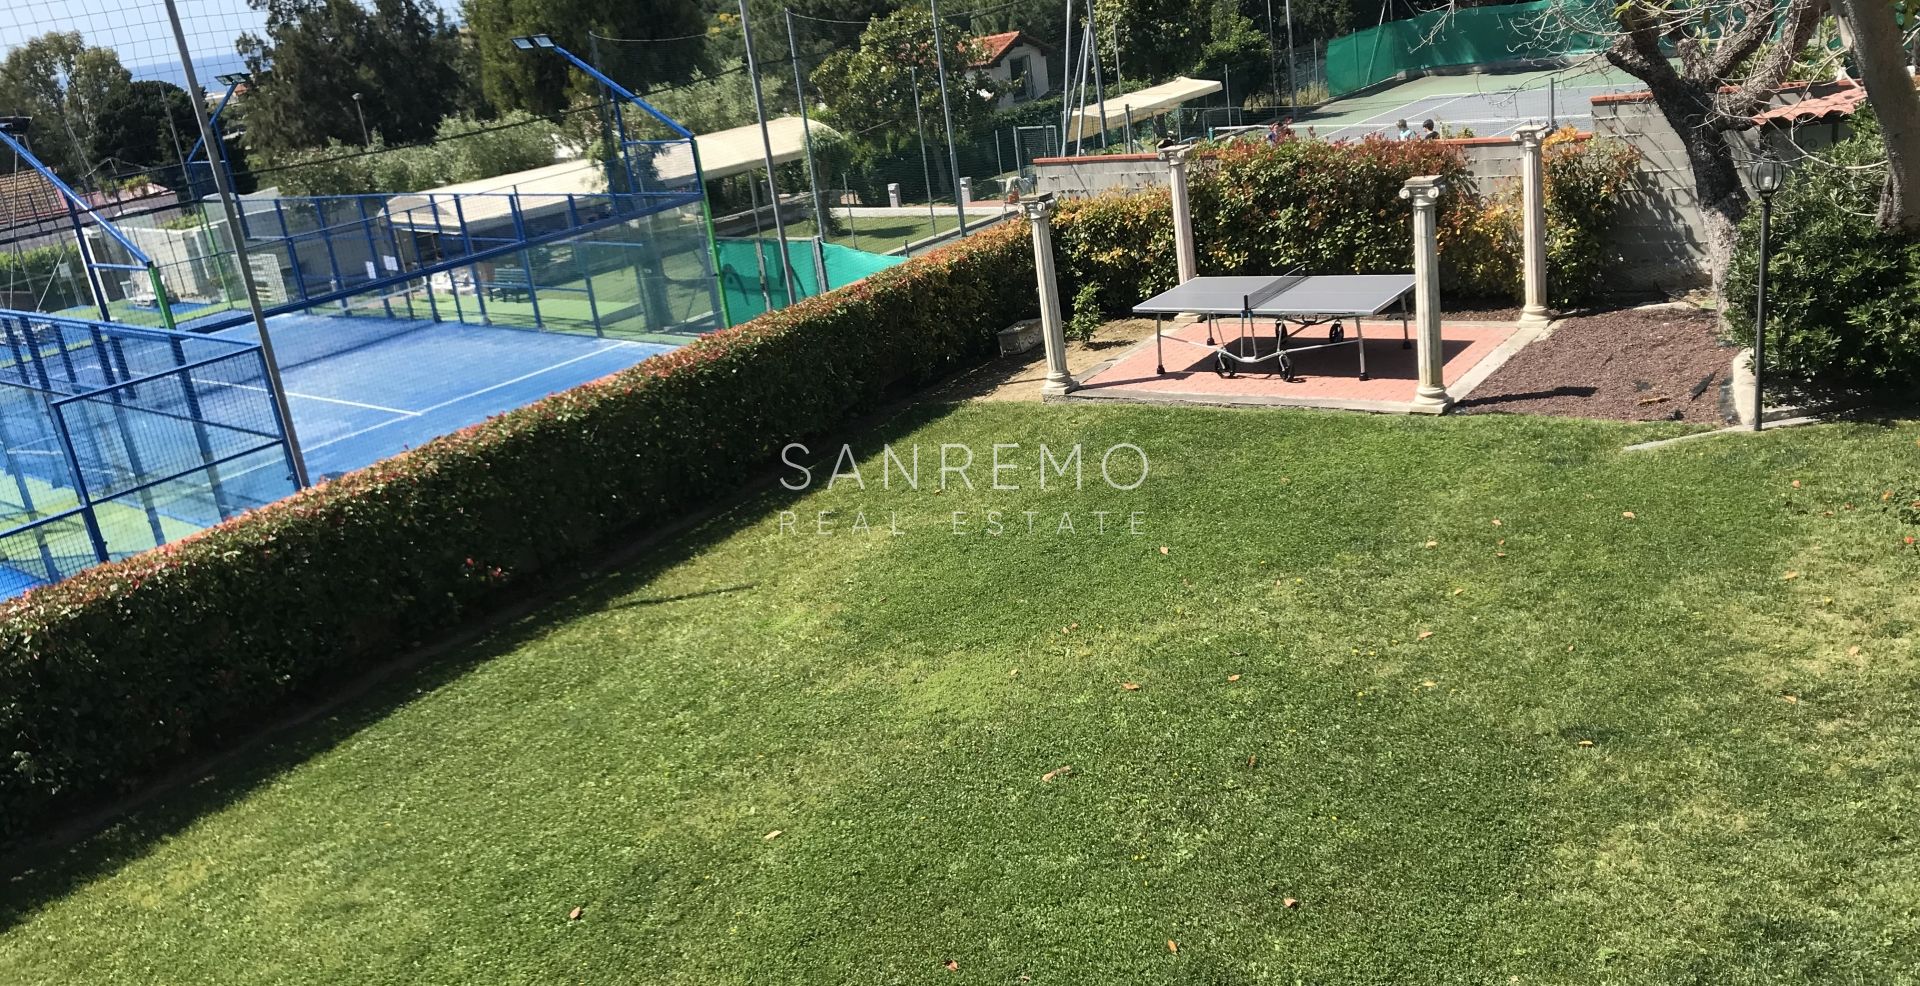 Liberty Style property for sale in Sanremo